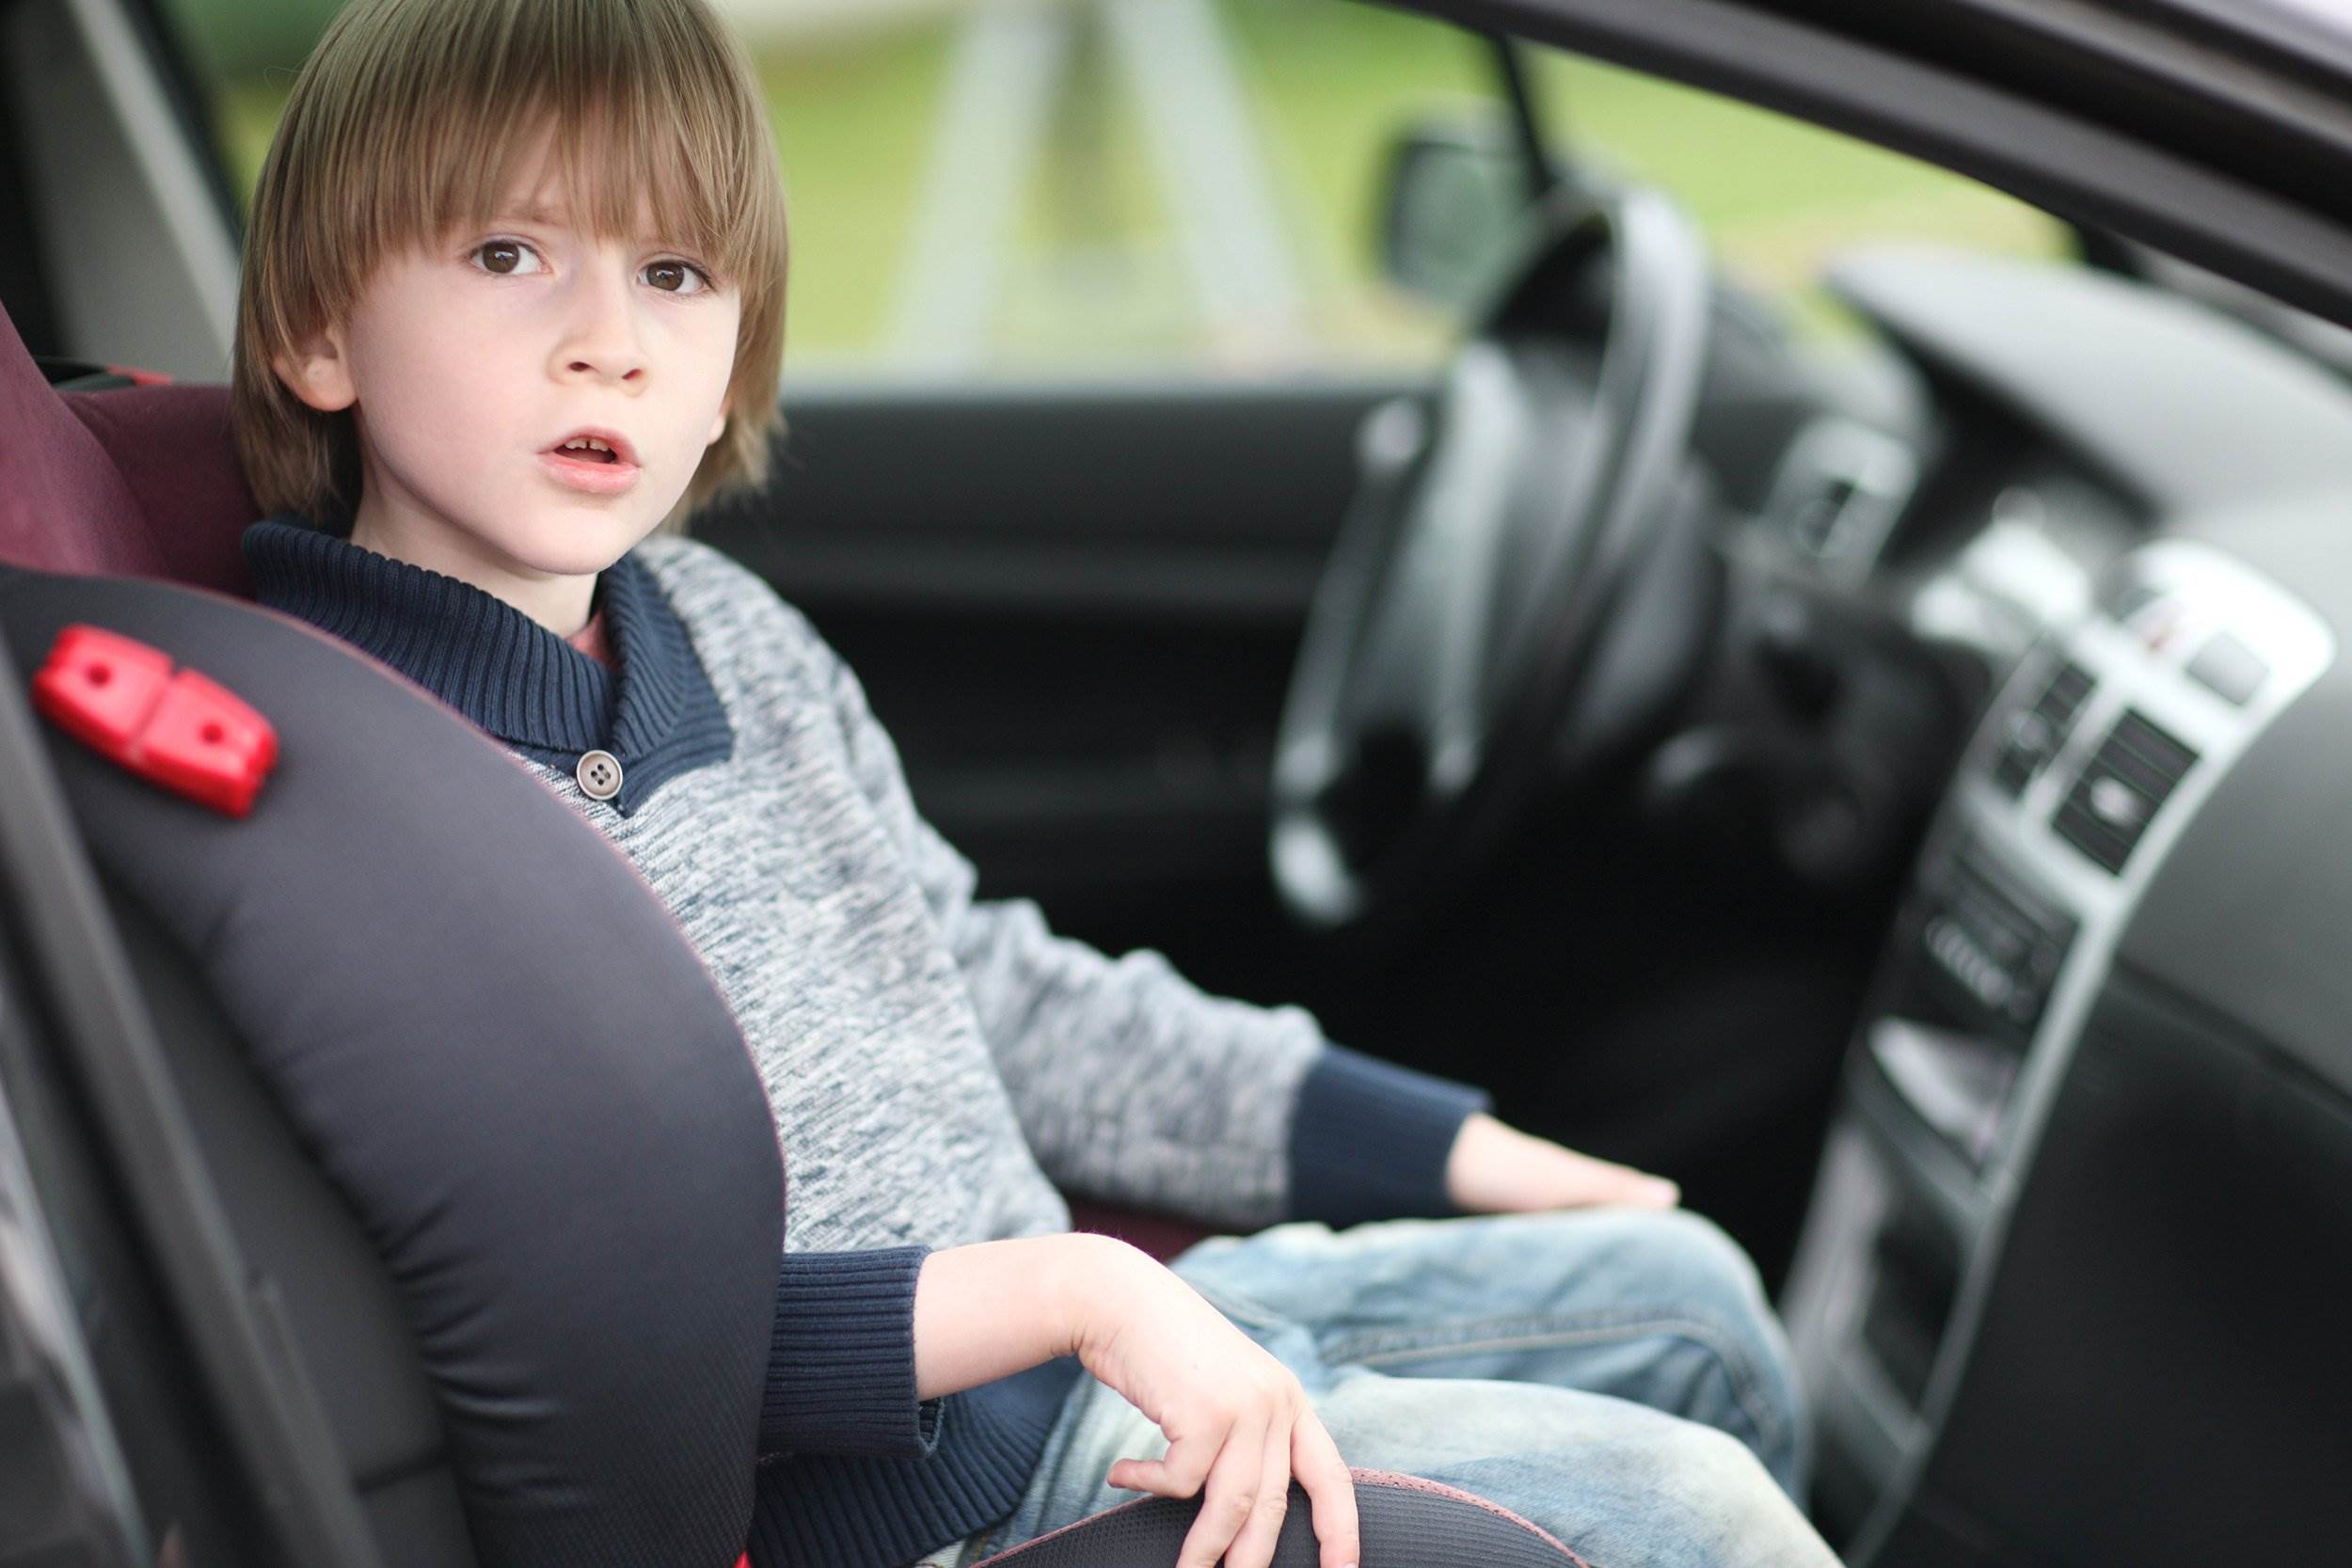 Young boy sitting in the front passenger seat - California car seat law regulates how young children are to be secured while riding in motor vehicles